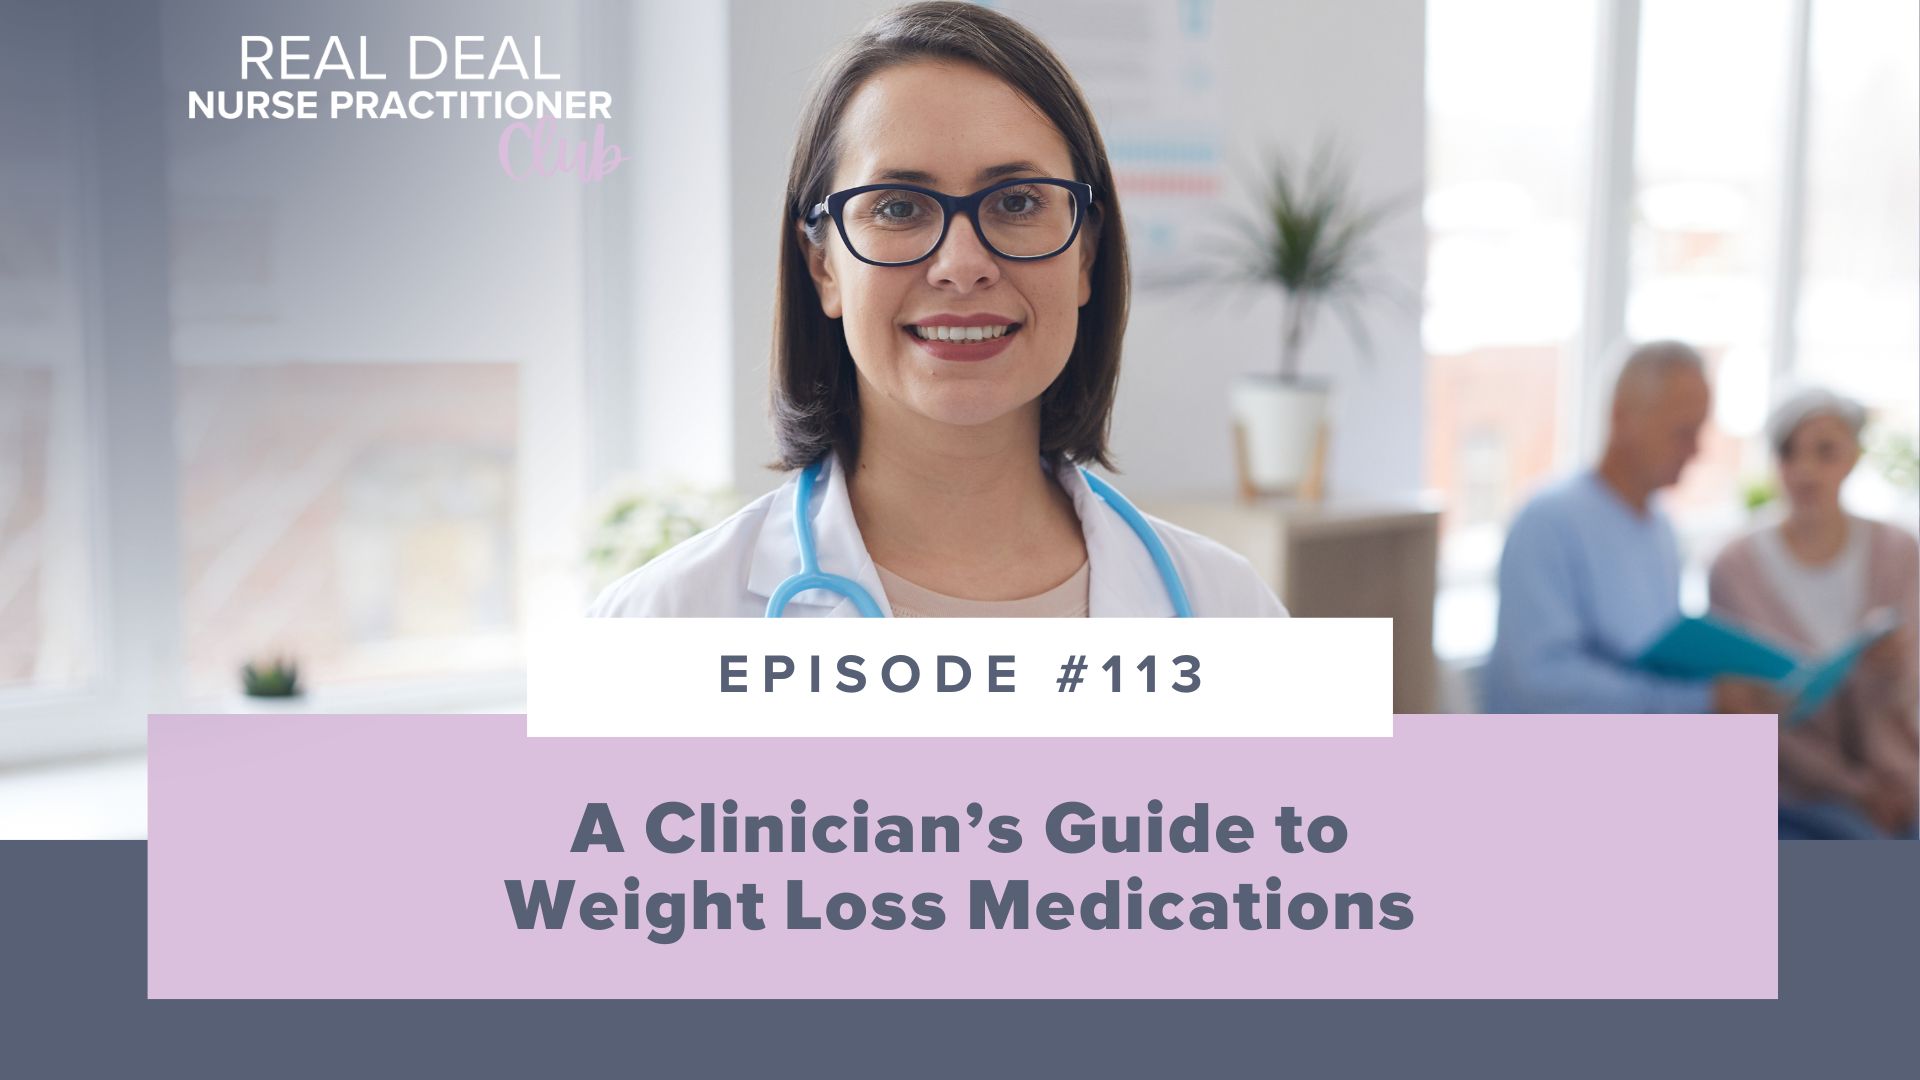 SMNP Blog - Episode #113: A Clinician’s Guide to Weight Loss Medications